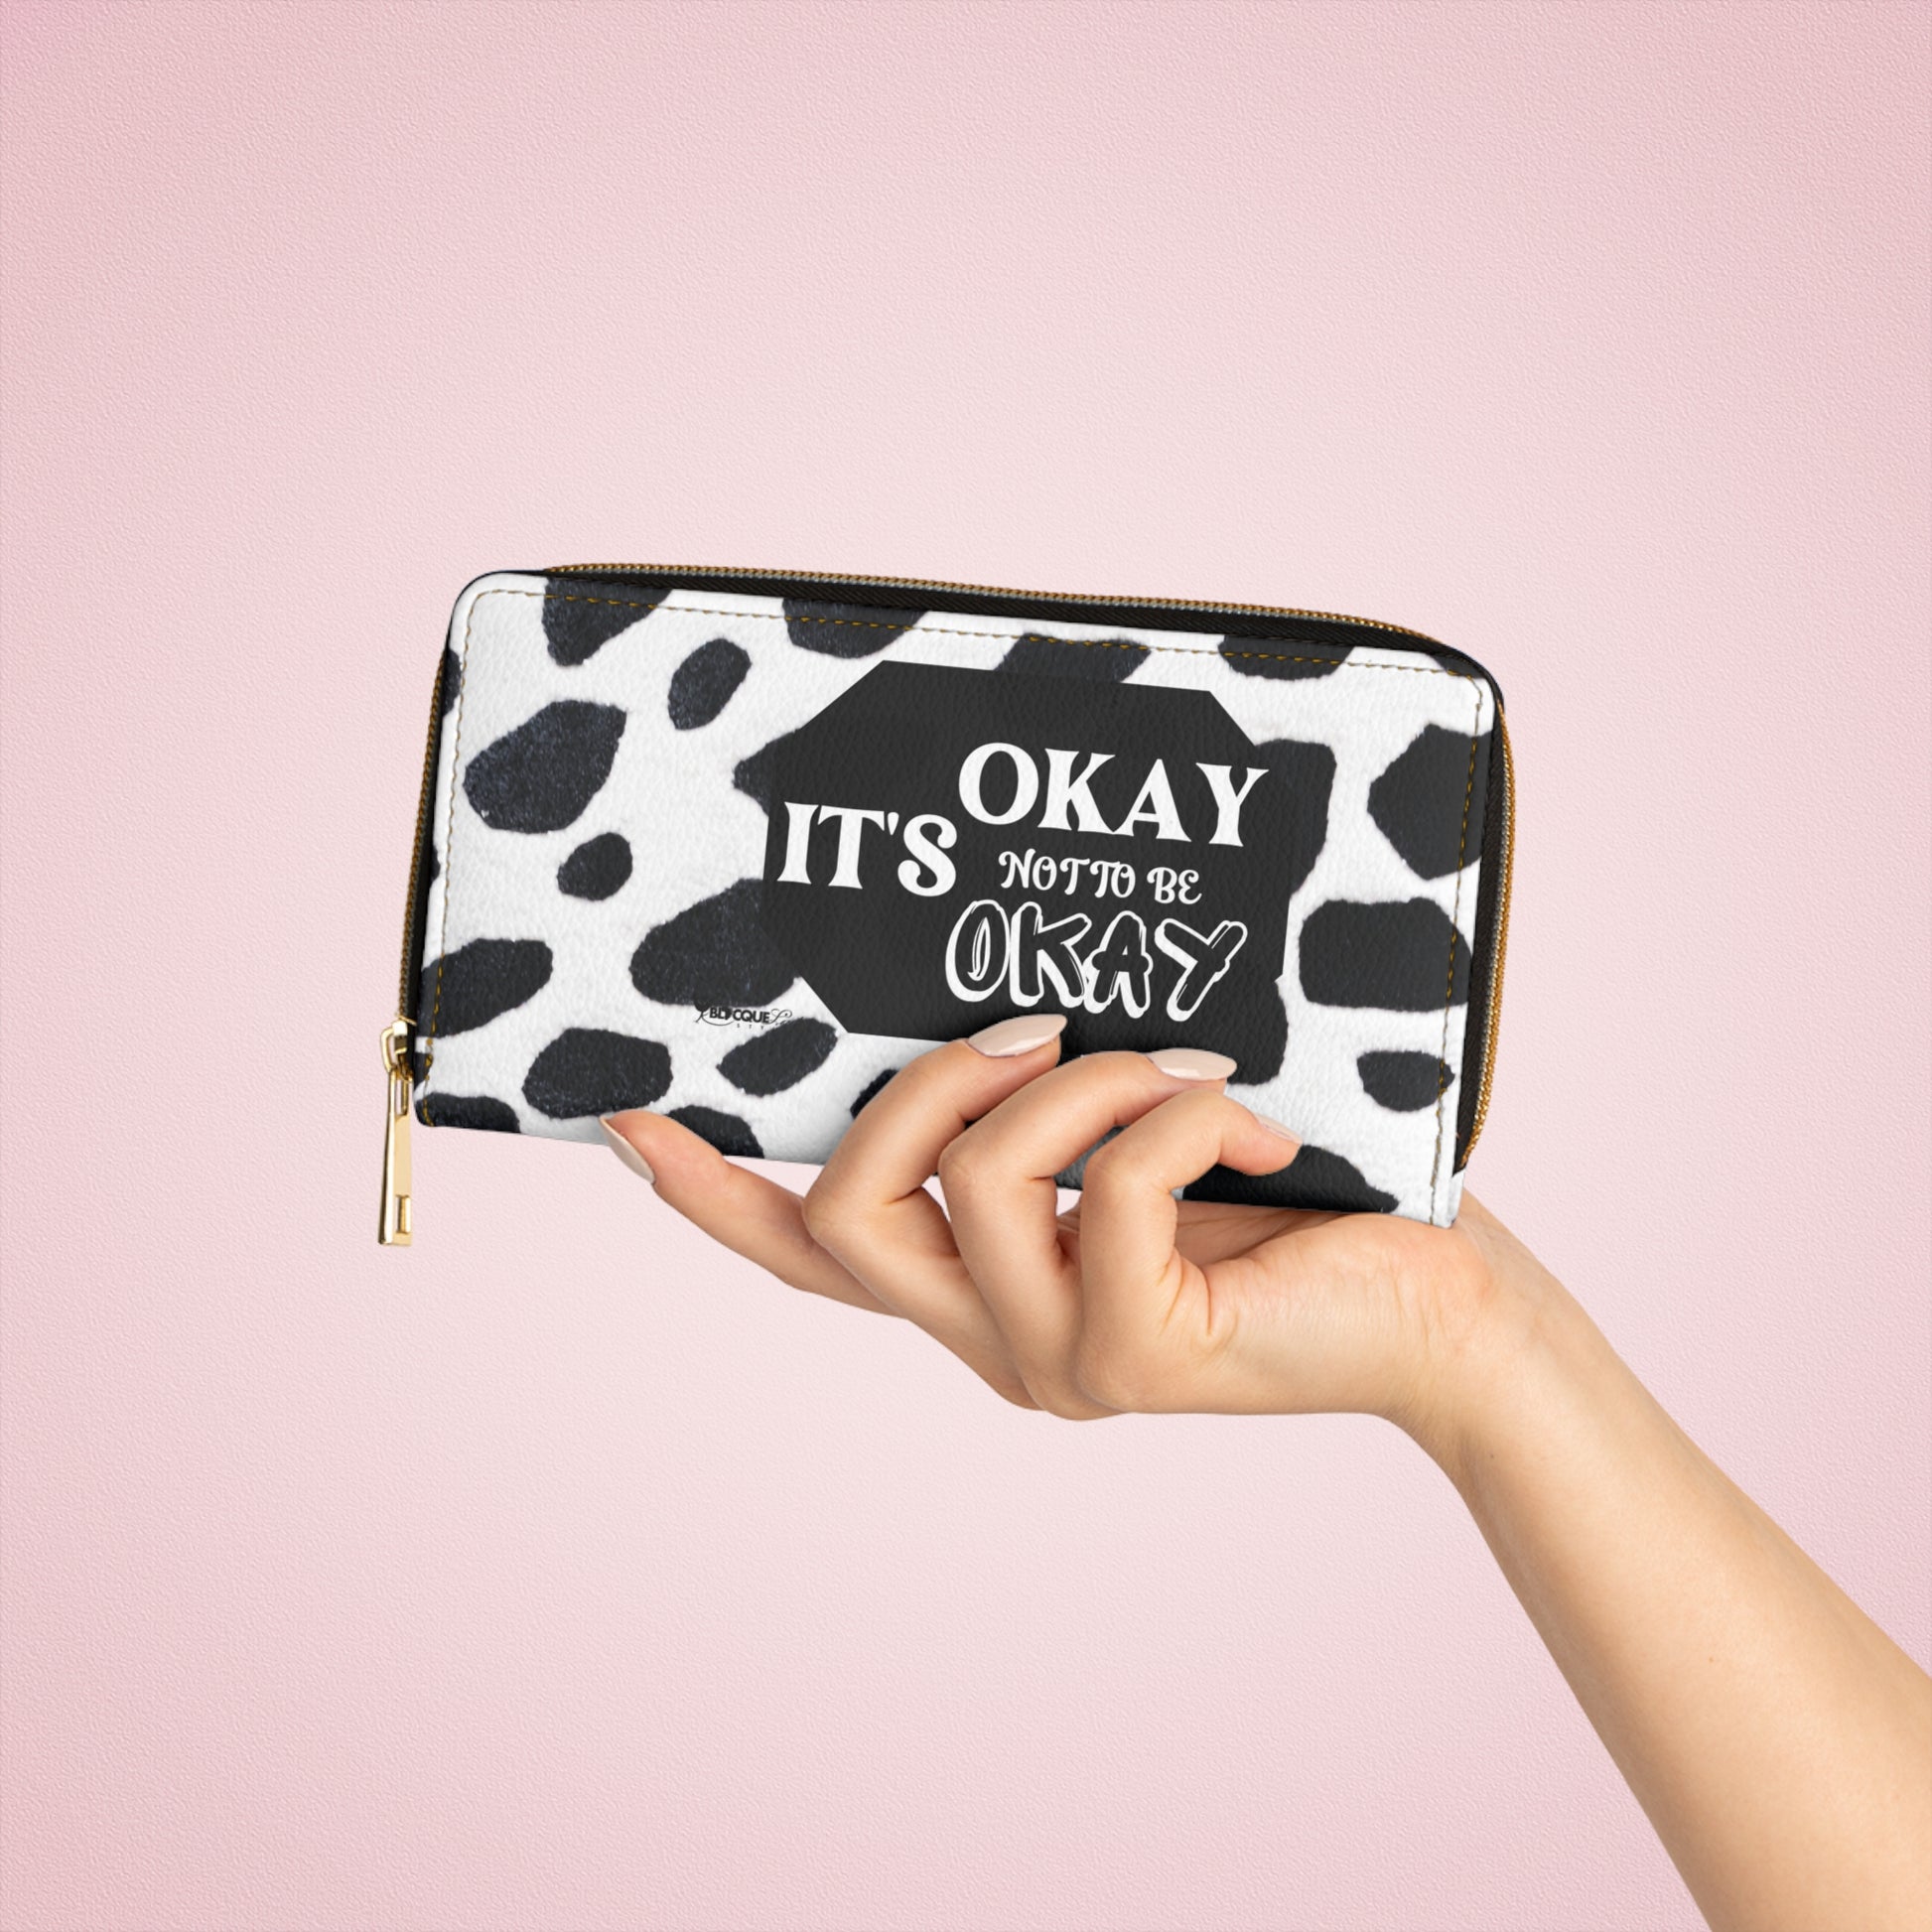 IT'S OKAY, NOT TO BE OKAY- Positive Afrocentric Affirmation Vegan Leather Wallet Bag- Empower Your Style and Self-Love ; Black & White Wallet